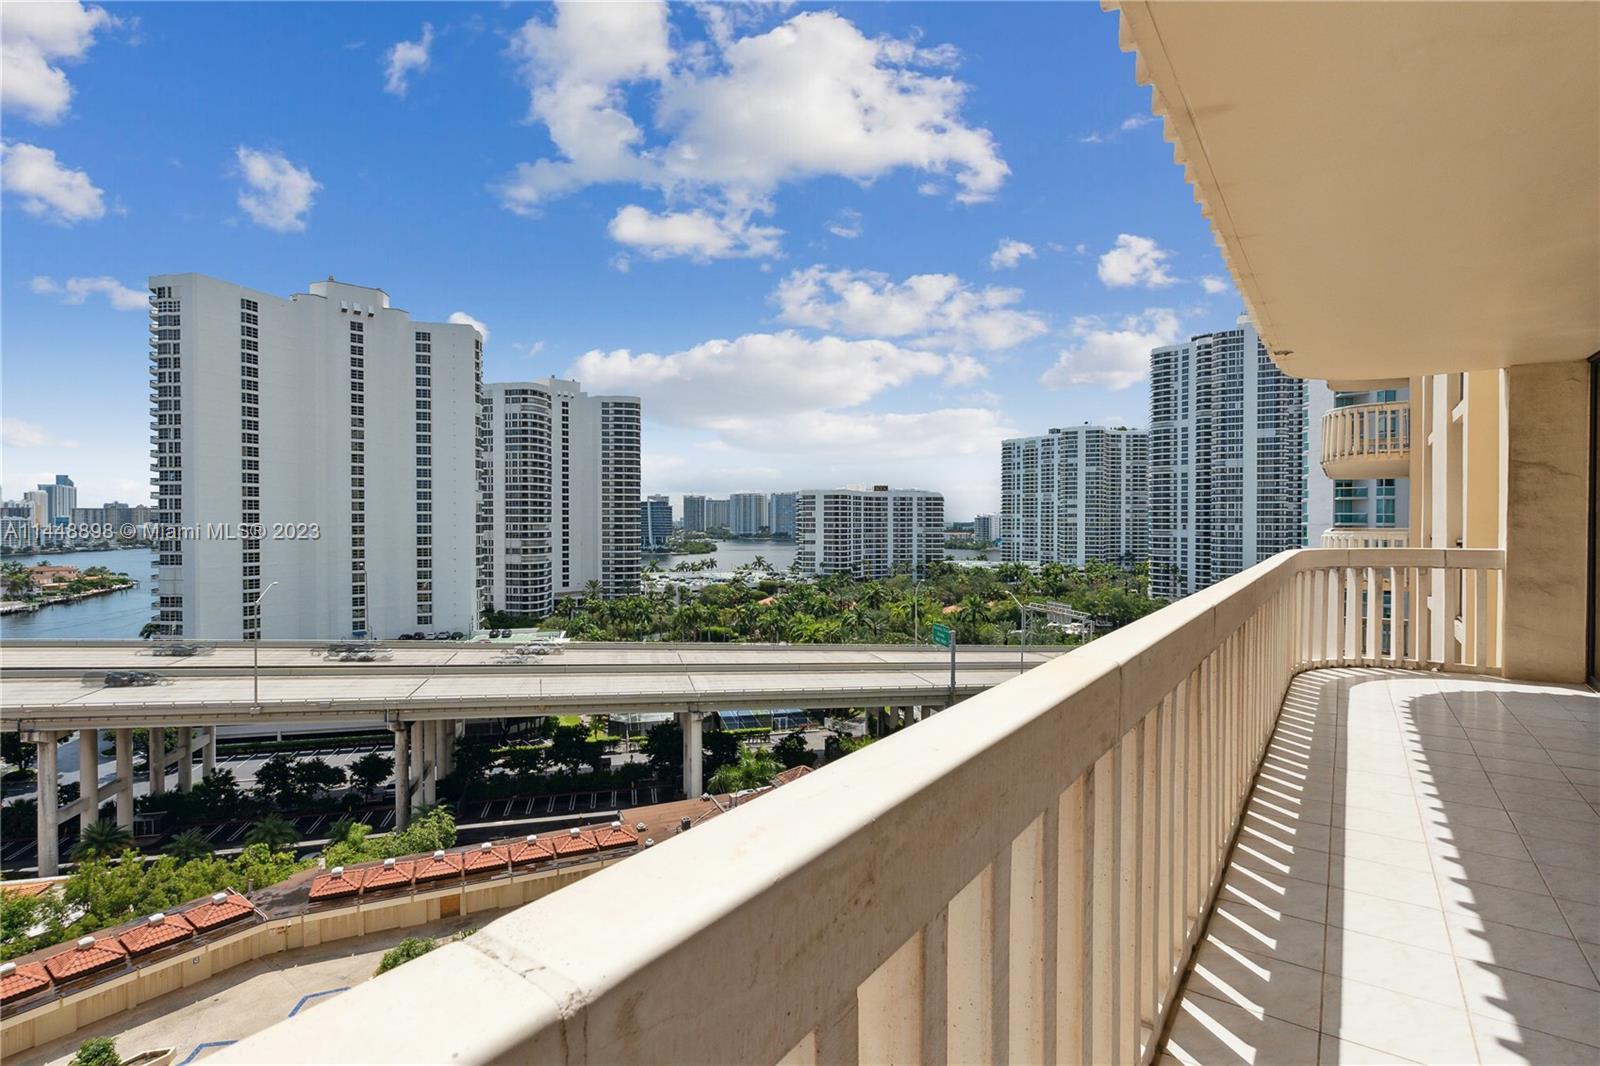 Enjoyable 2 bed + DEN | 2 bath at elegant Turnberry Towers. 1677 SqFt on the 11th floor with beautif